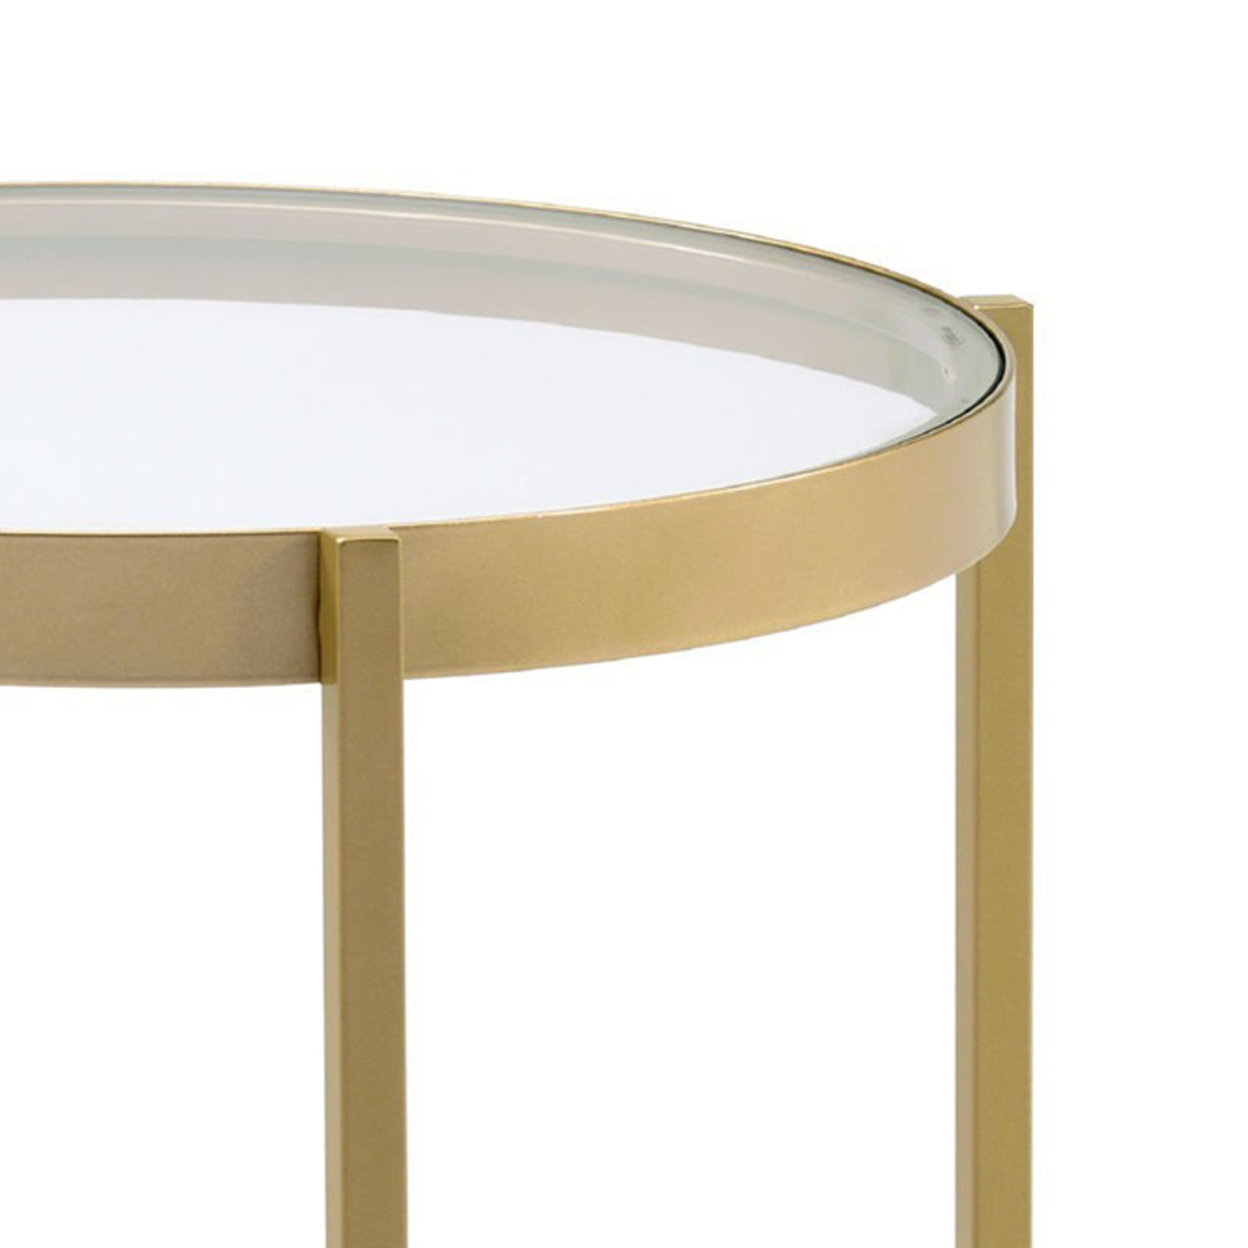 End Table With Round Glass Top And Metal Frame, Gold- Saltoro Sherpi